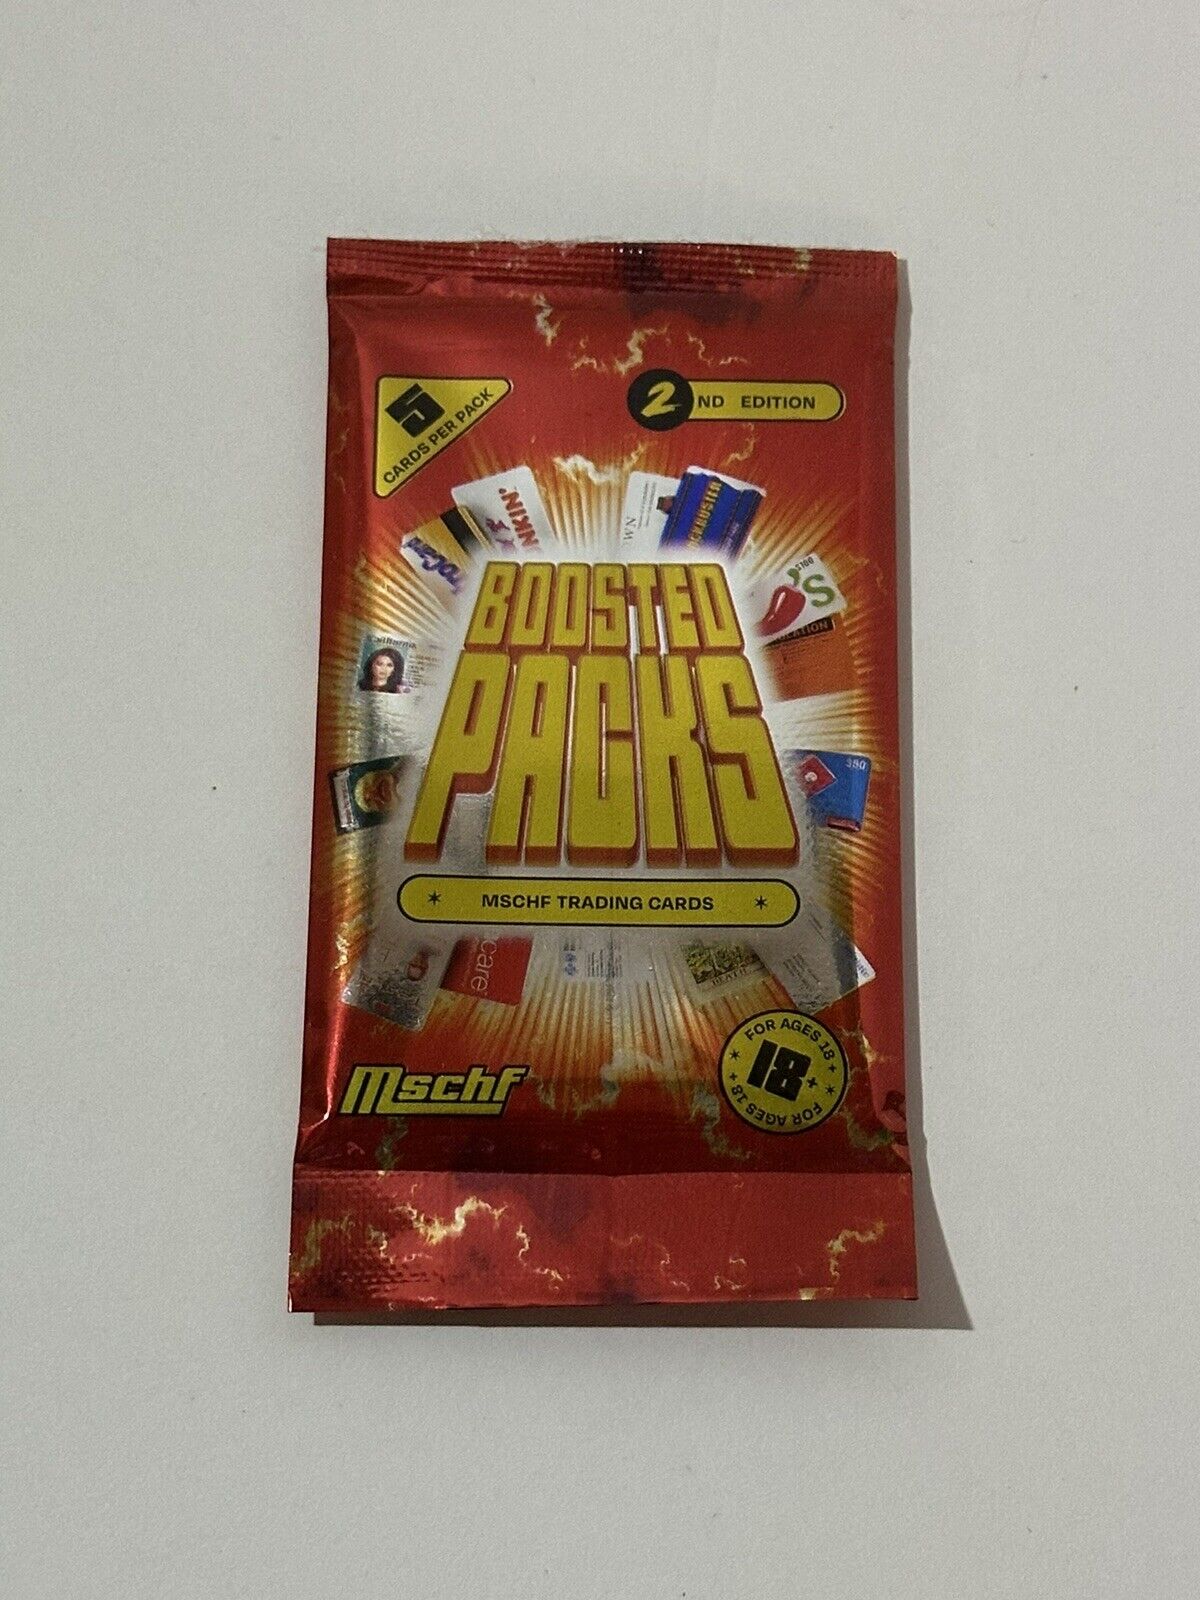 MSCHF Boosted Pack 2nd Edition- V2 SINGLE Pack - New And Unopened